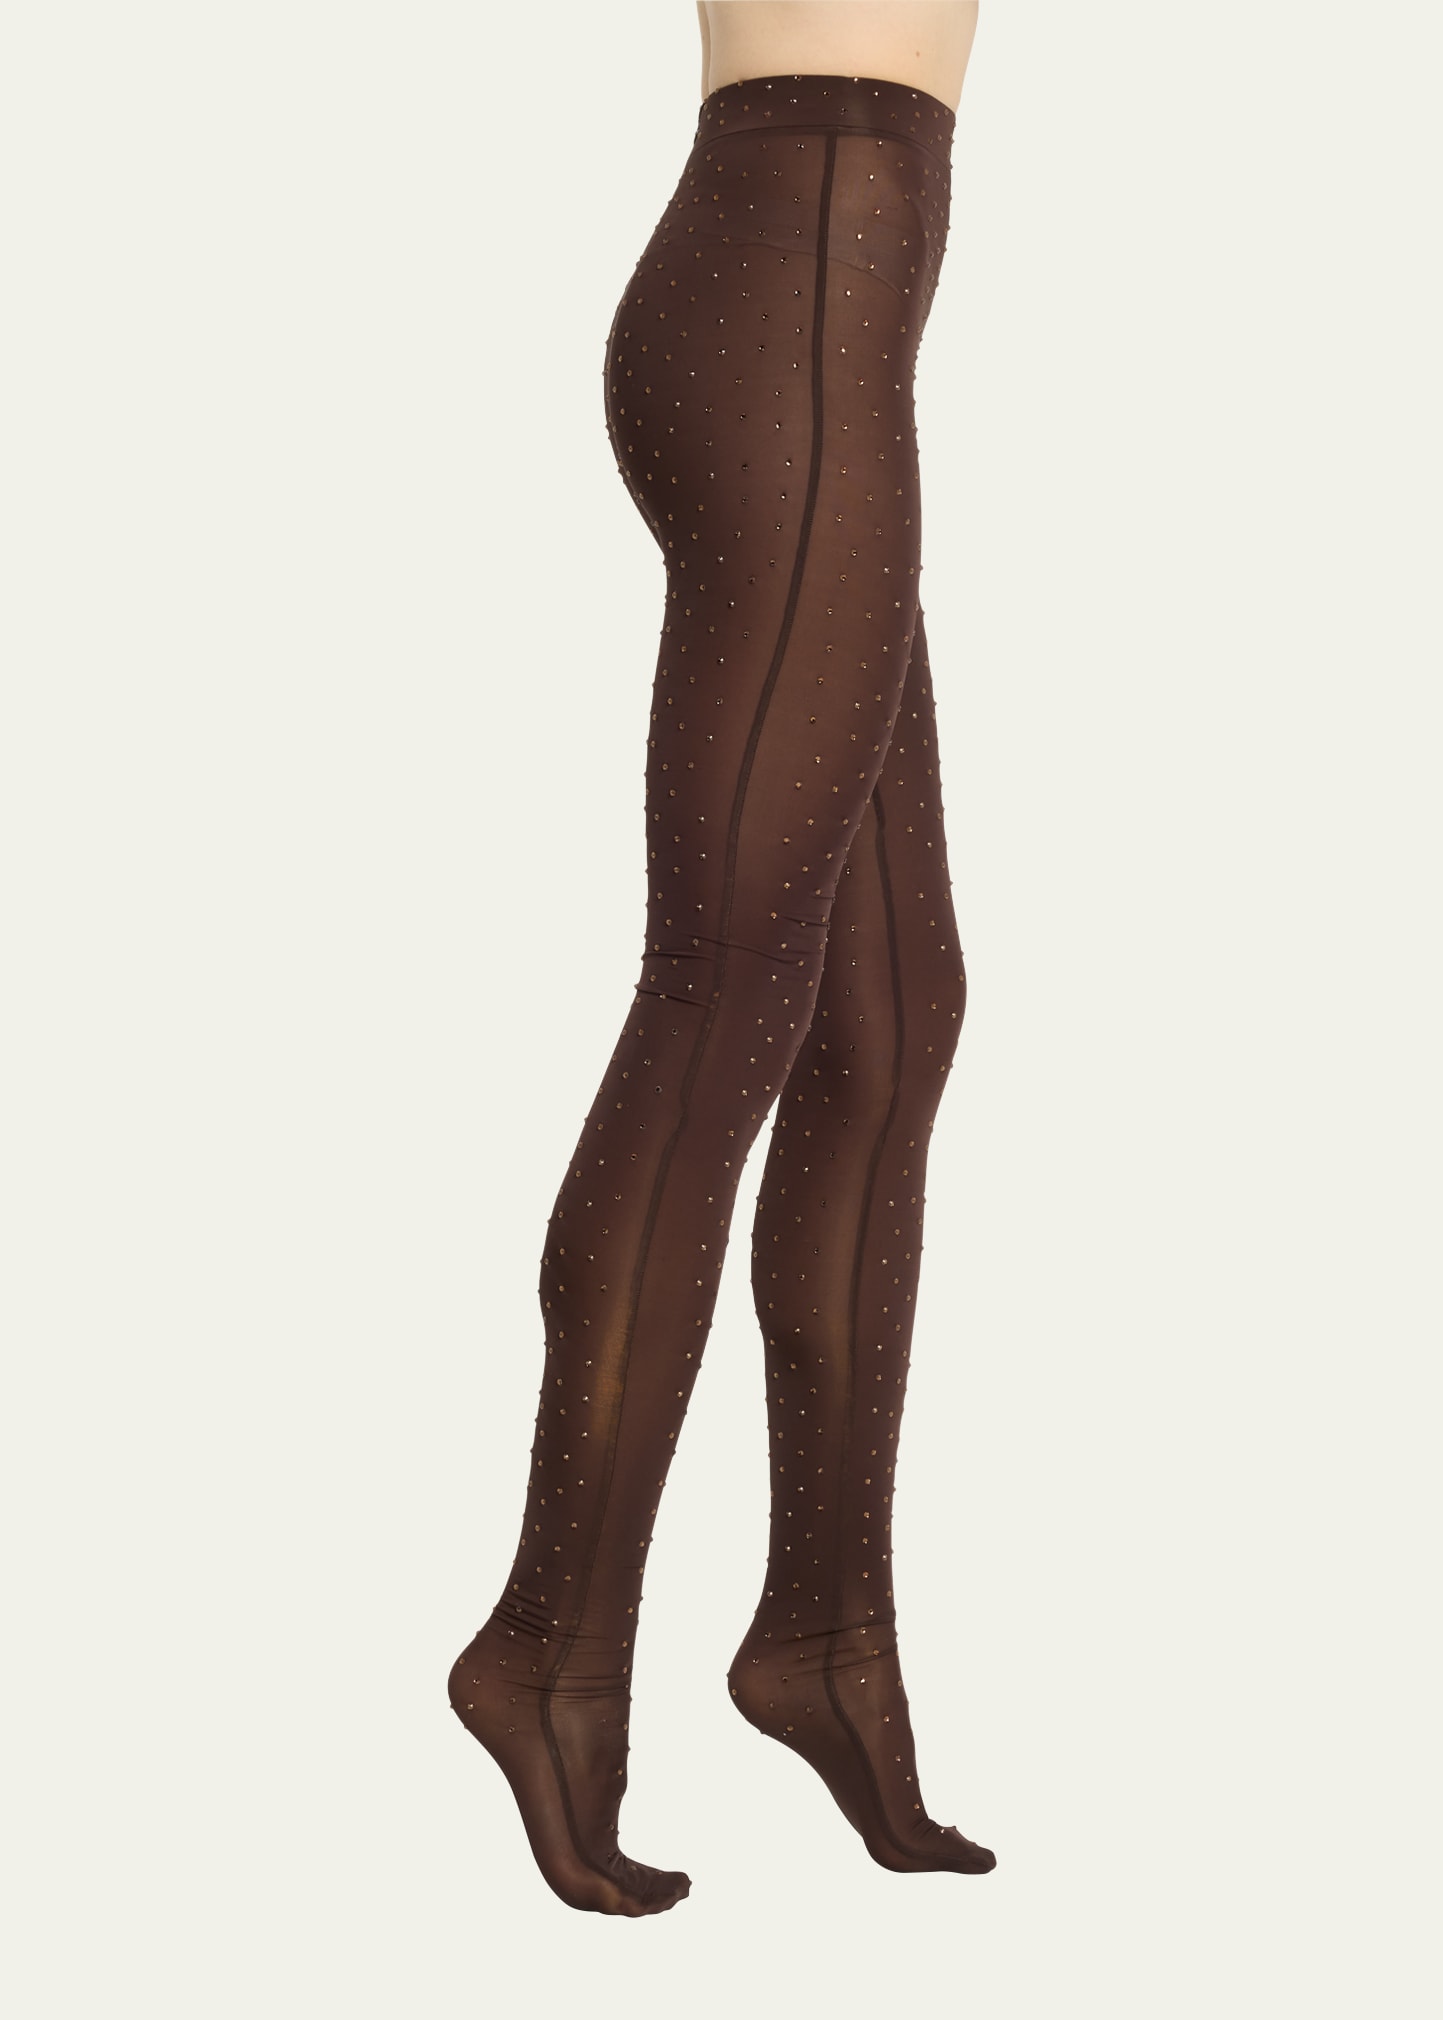 Crystal-embellished jersey tights in purple - Alex Perry